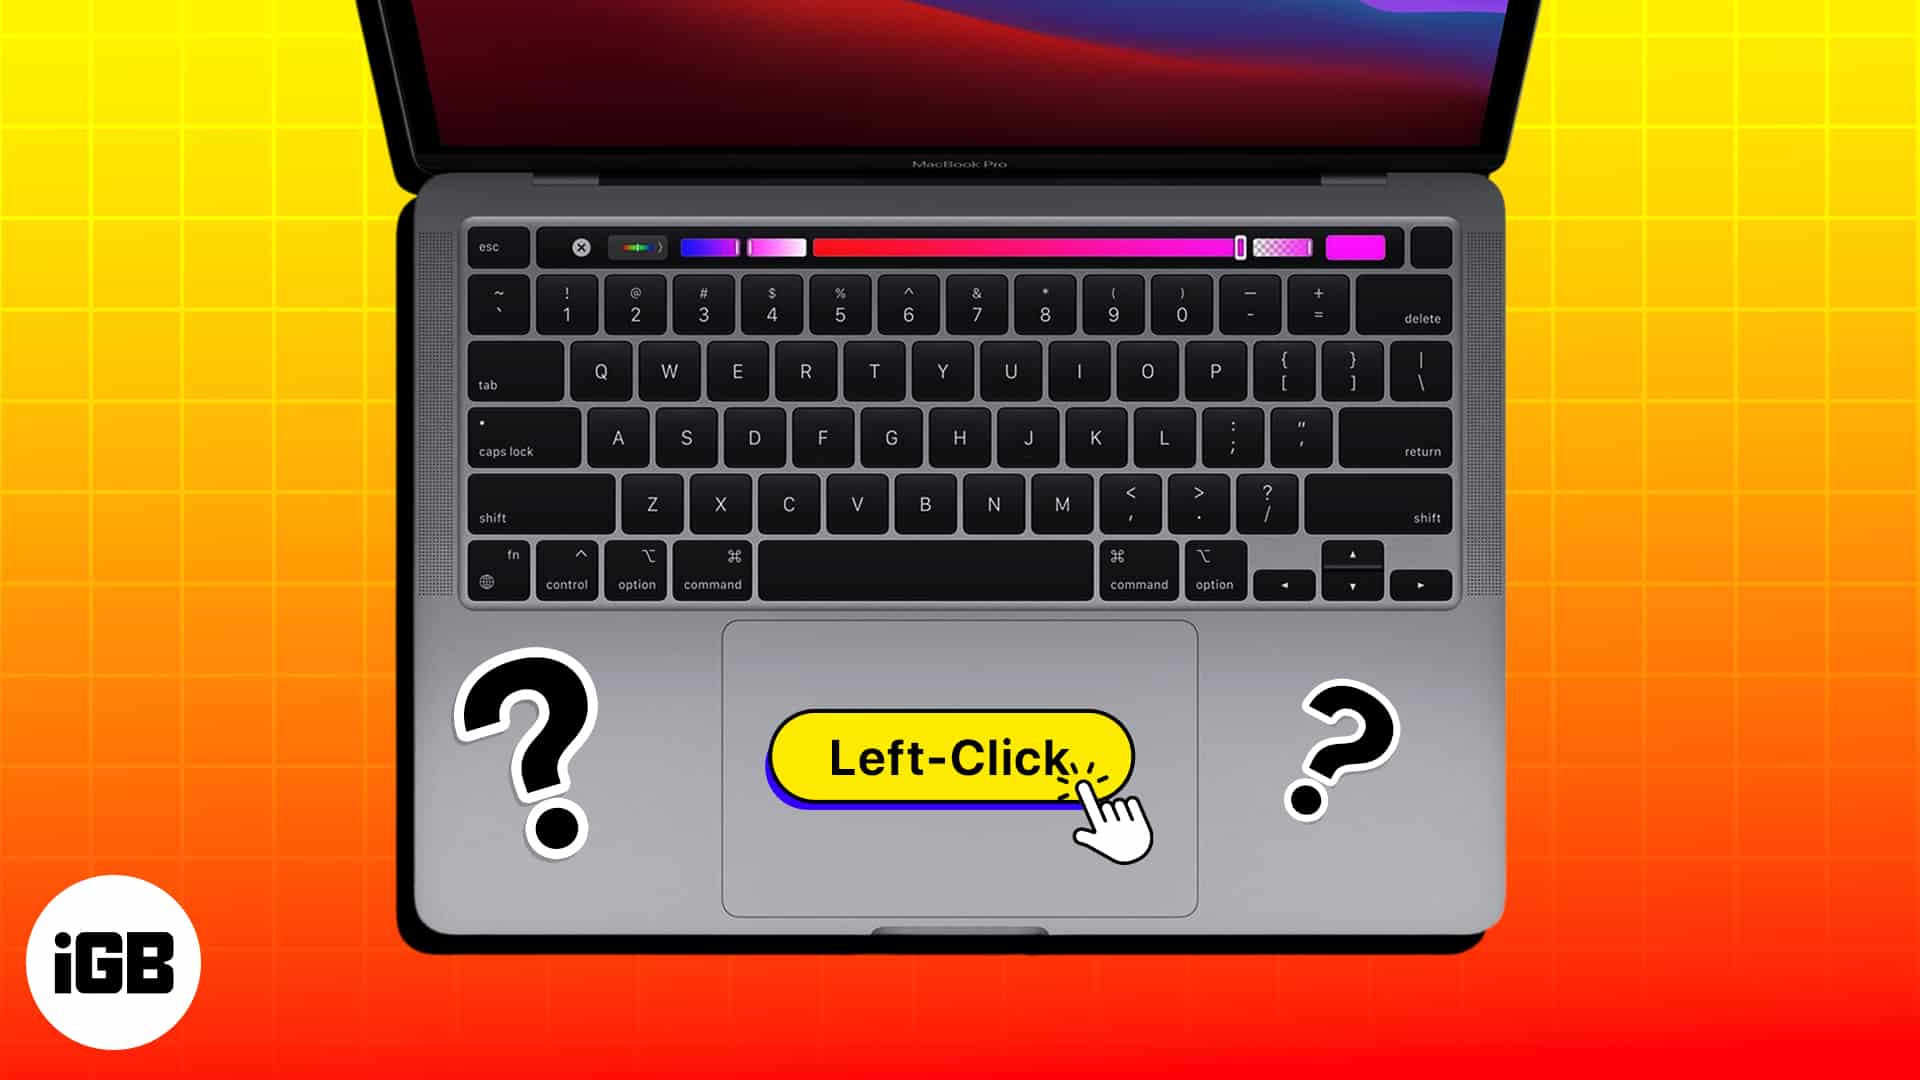 How to left click on Mac Easy ways explained